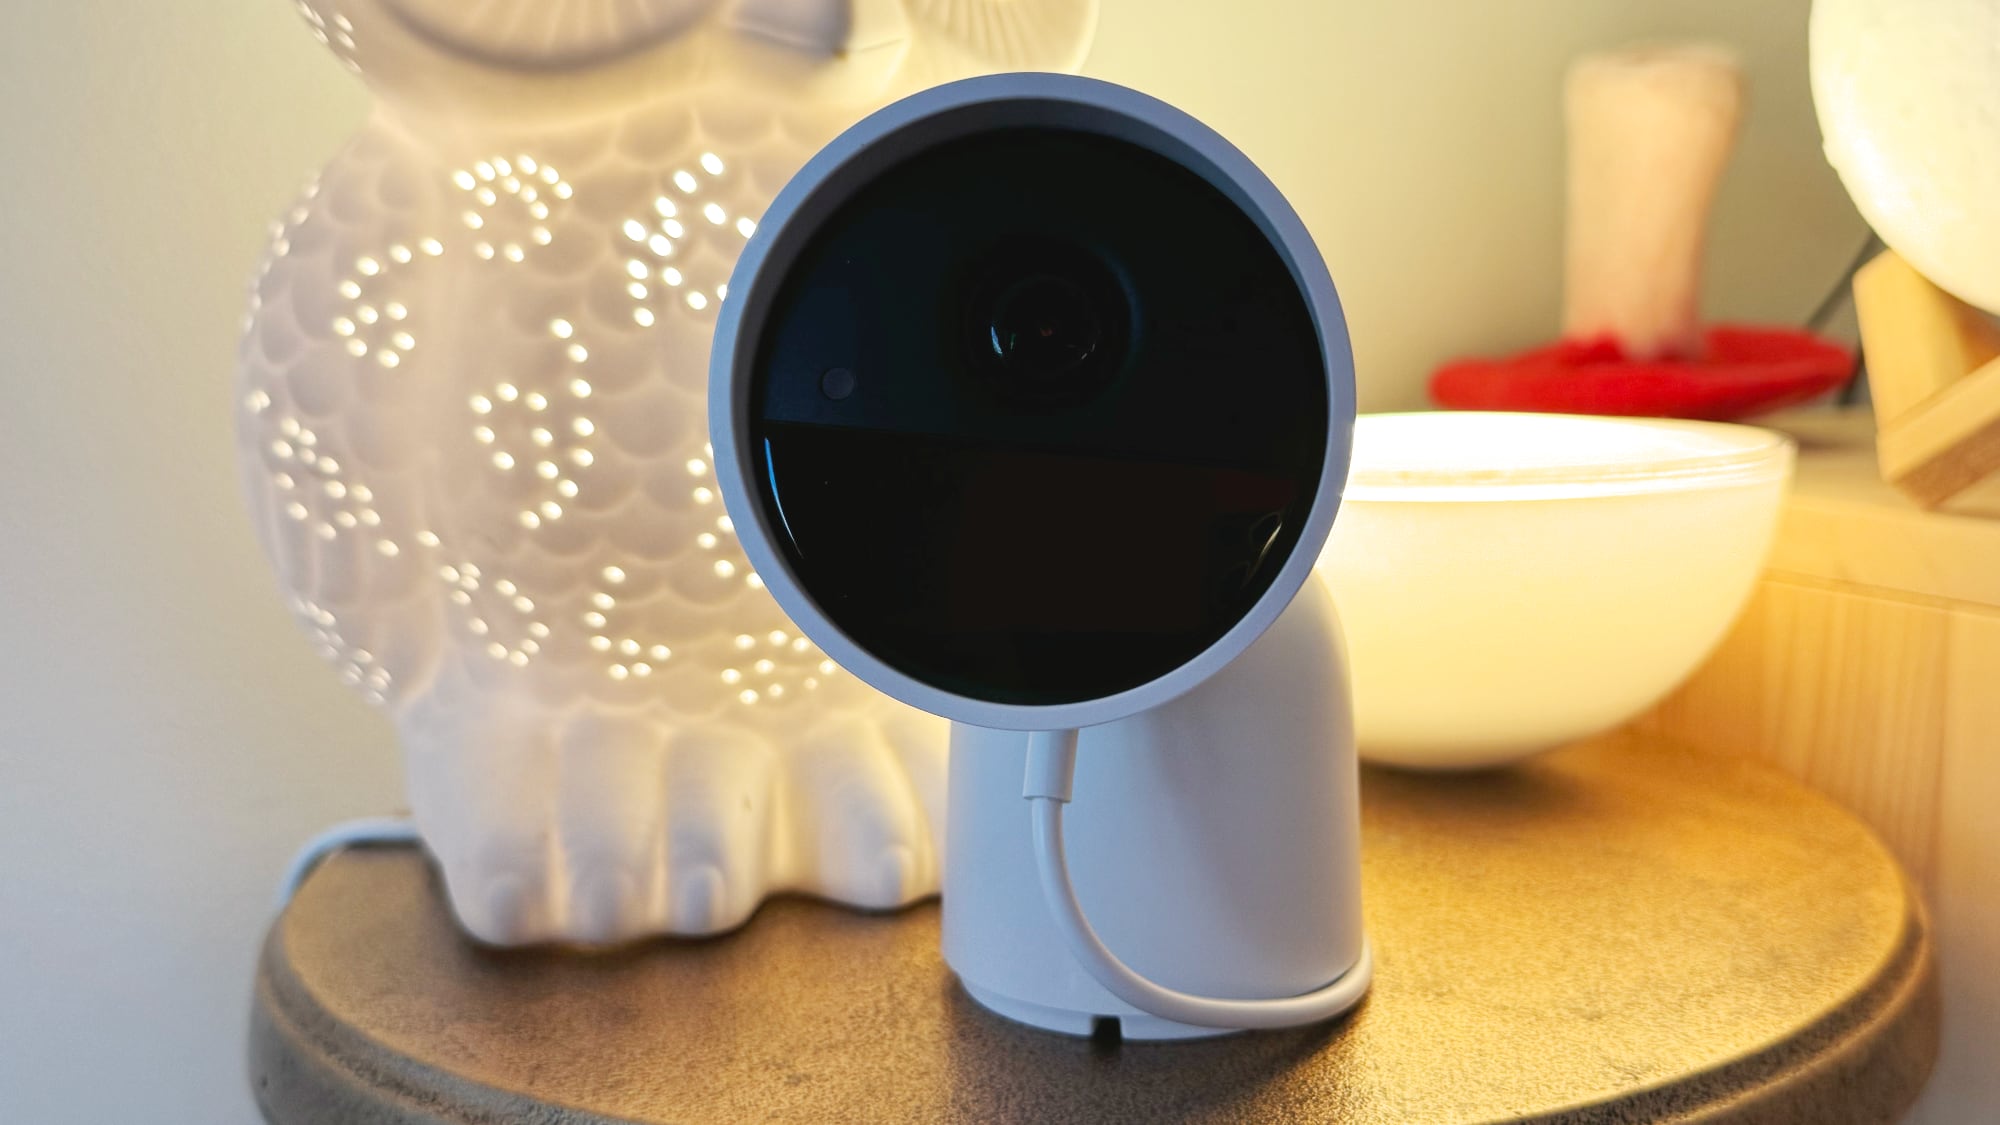 Philips Hue gets into home surveillance with its new Secure cameras